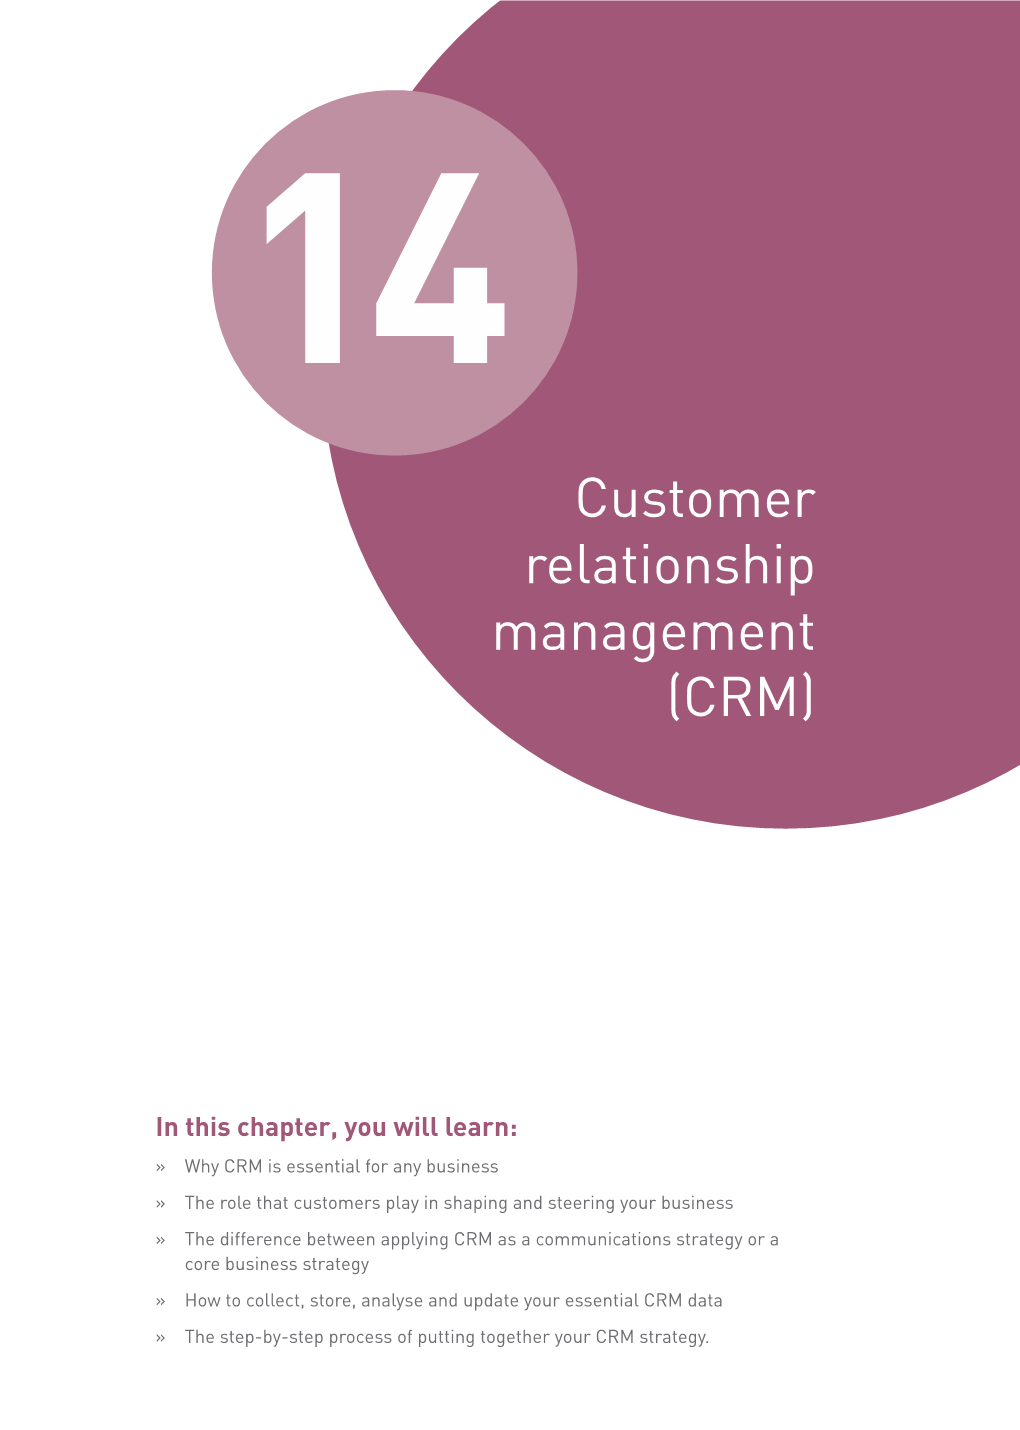 Customer Relationship Management (CRM) Chapter Leads to the Most Arguments About Placement Whenever We Update This Book